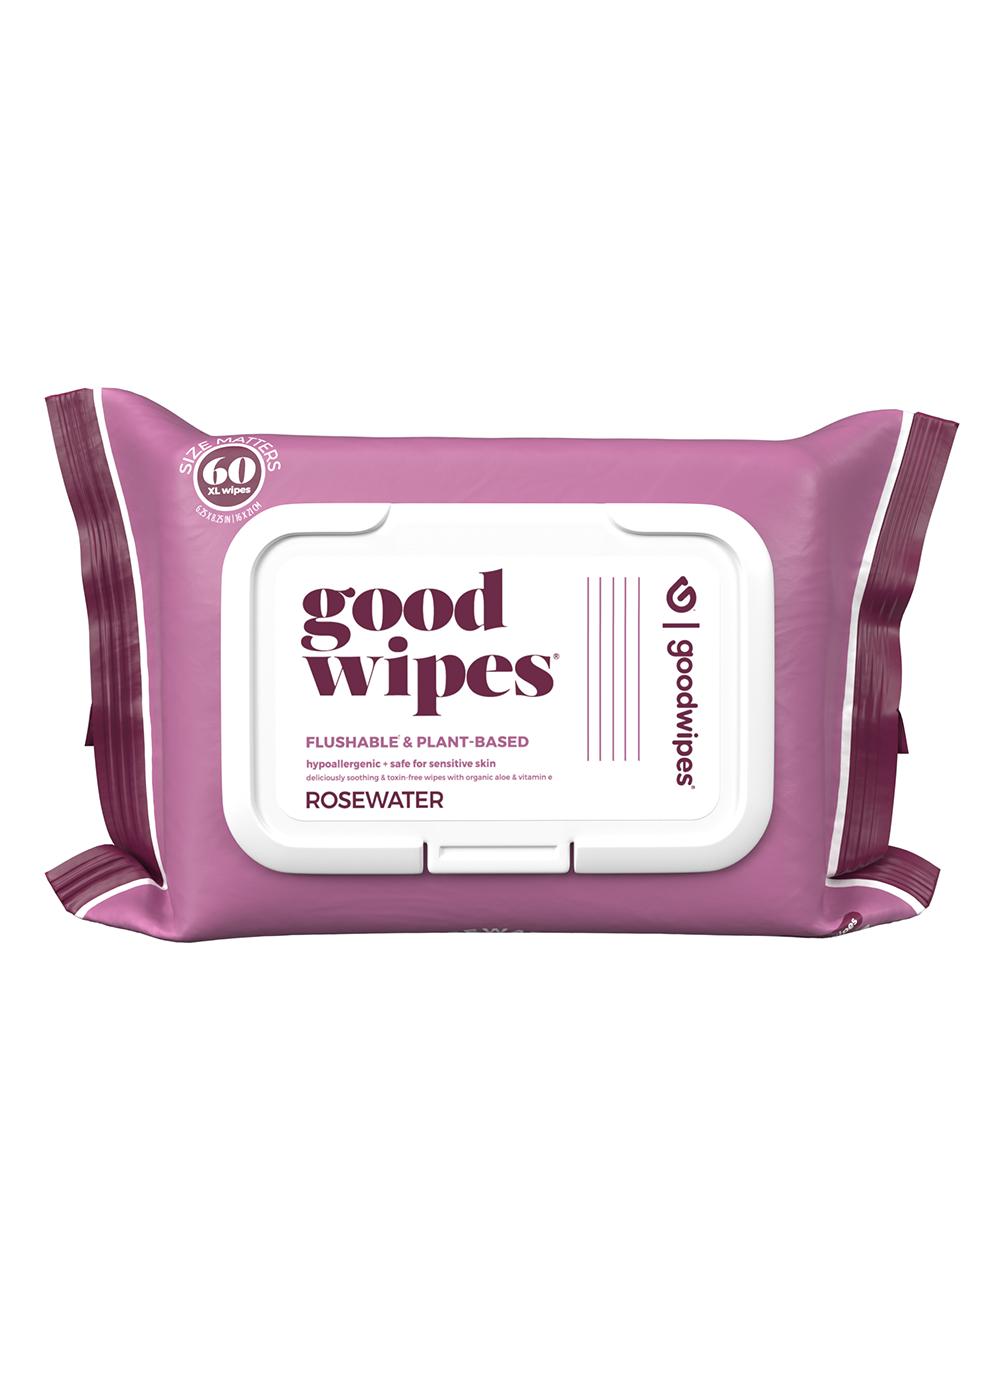 Goodwipes Flushable & Biodegradable Wipes - Rosewater; image 1 of 4